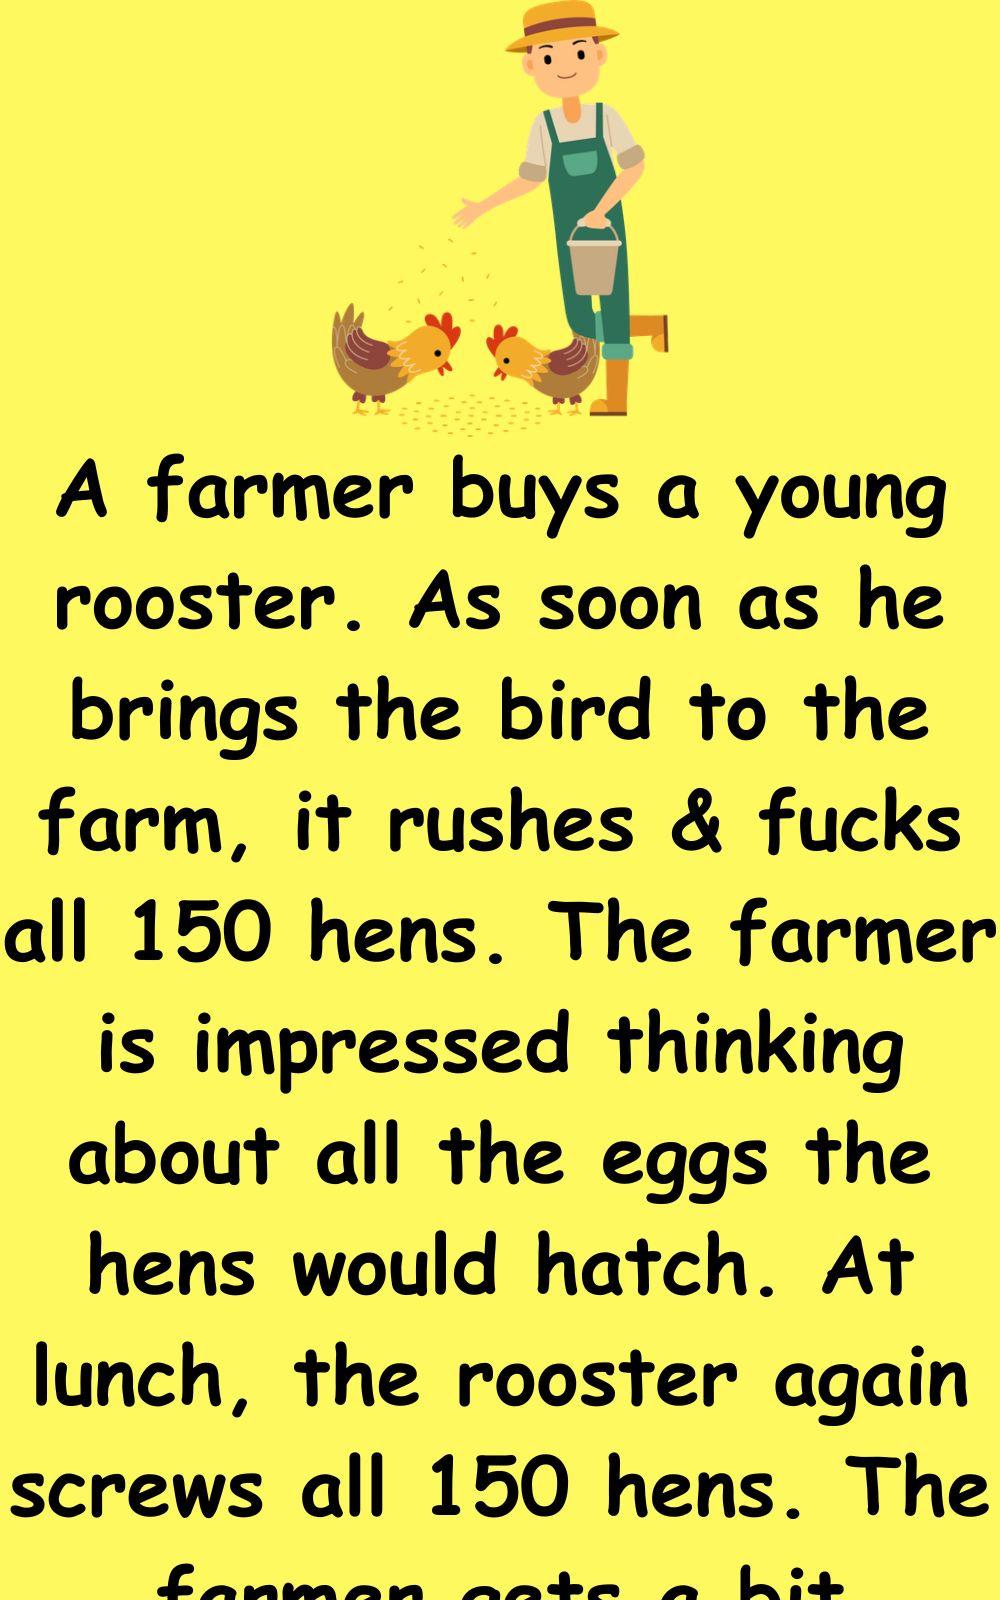 A farmer buys a young rooster